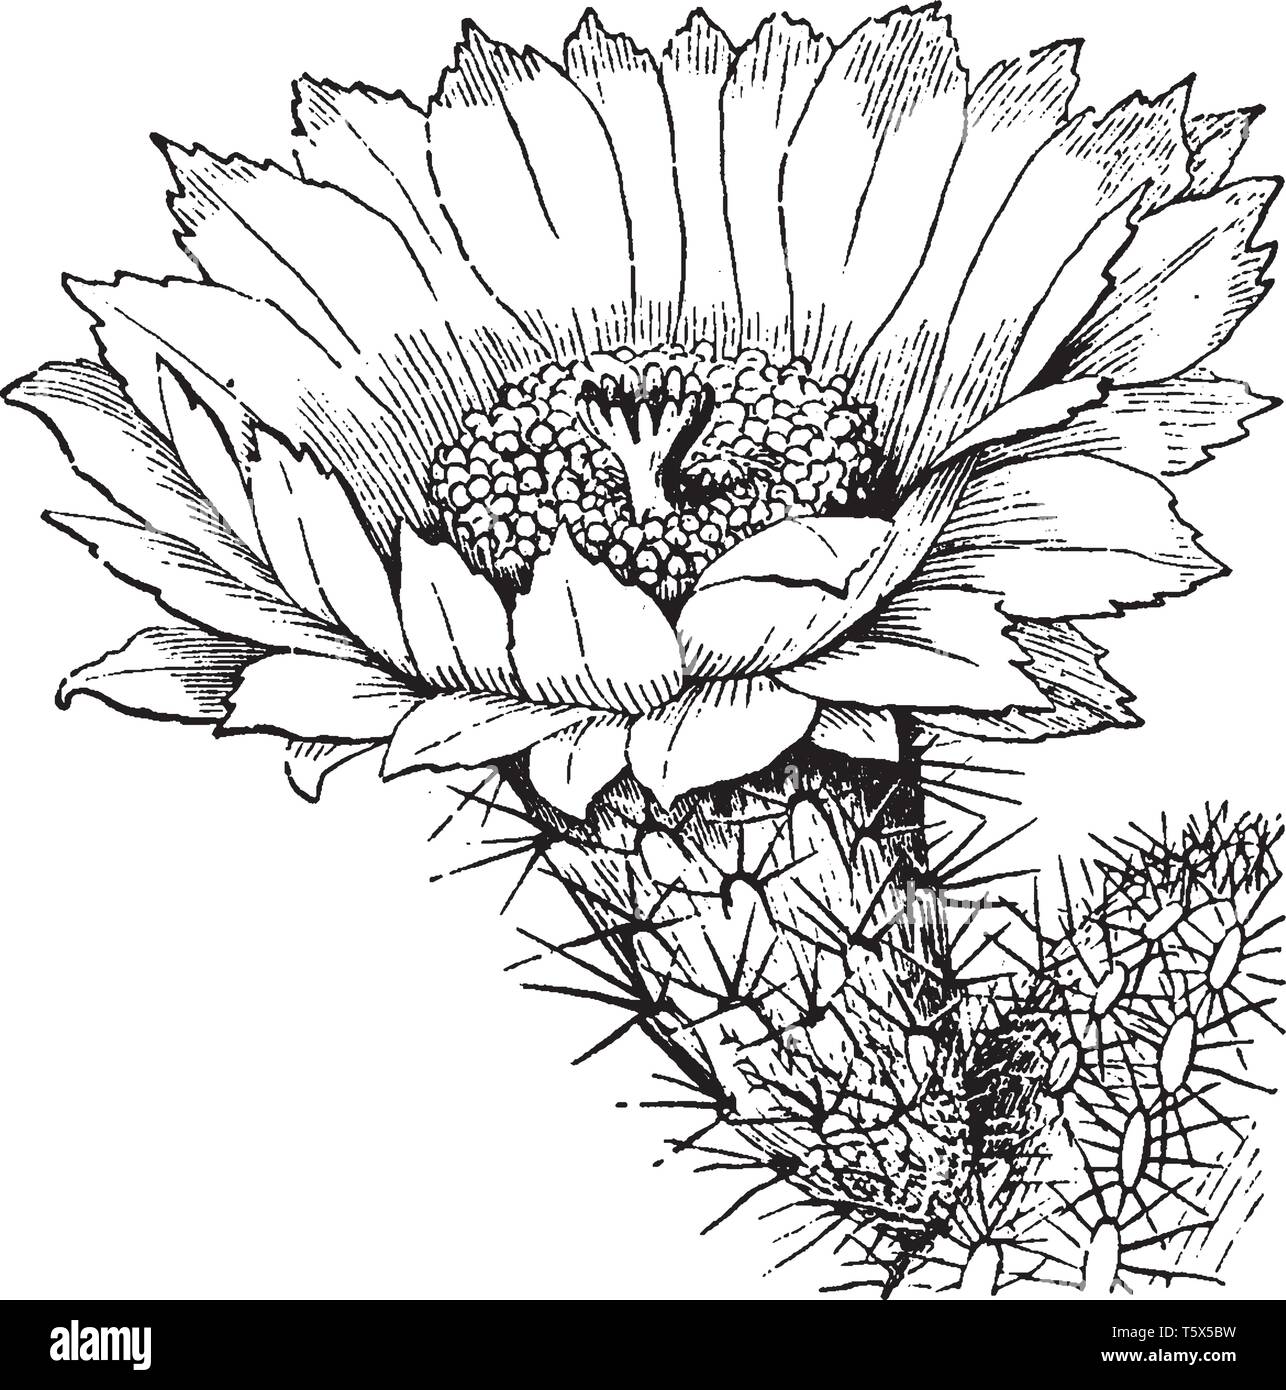 A picture showing the flower of Mammillaria. The genus Mammillaria is one of the largest in the cactus family Cactaceae, vintage line drawing or engra Stock Vector